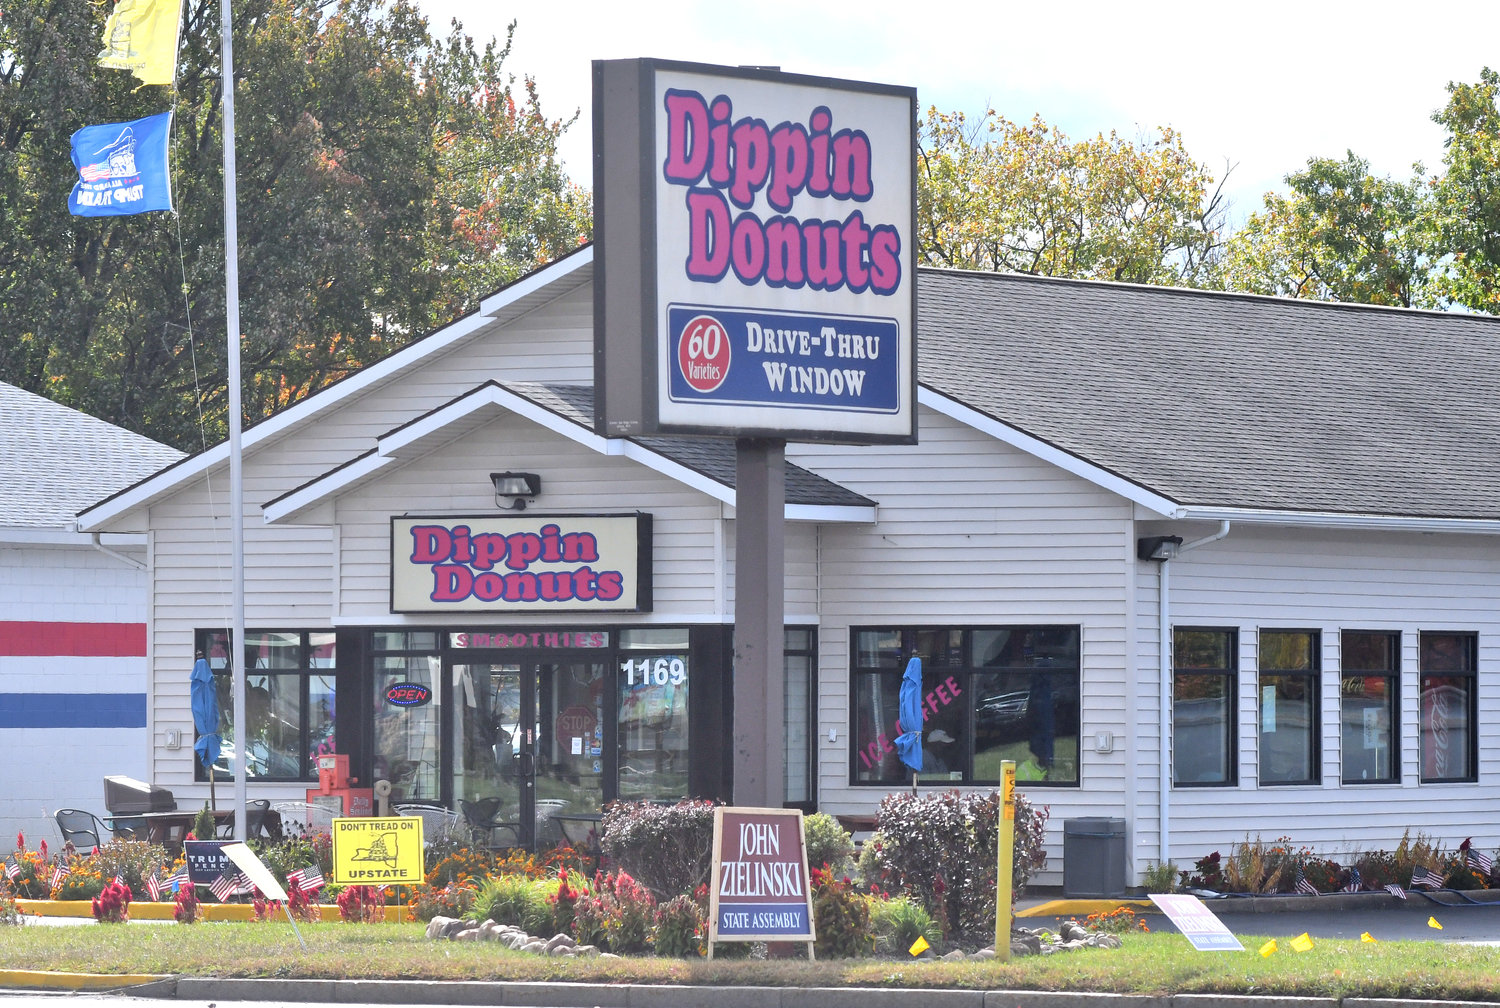 SKIMMING AT DIPPIN? — Prosecutors claim between 2013 and 2017, three members of the Zourdos family, owners of Dippin Donuts including the Erie Boulevard West store shown above in this file photo, concealed more than $1 million in cash sales to avoid paying taxes on it. Jury selection begin in Federal Court in Utica on Monday in the case.